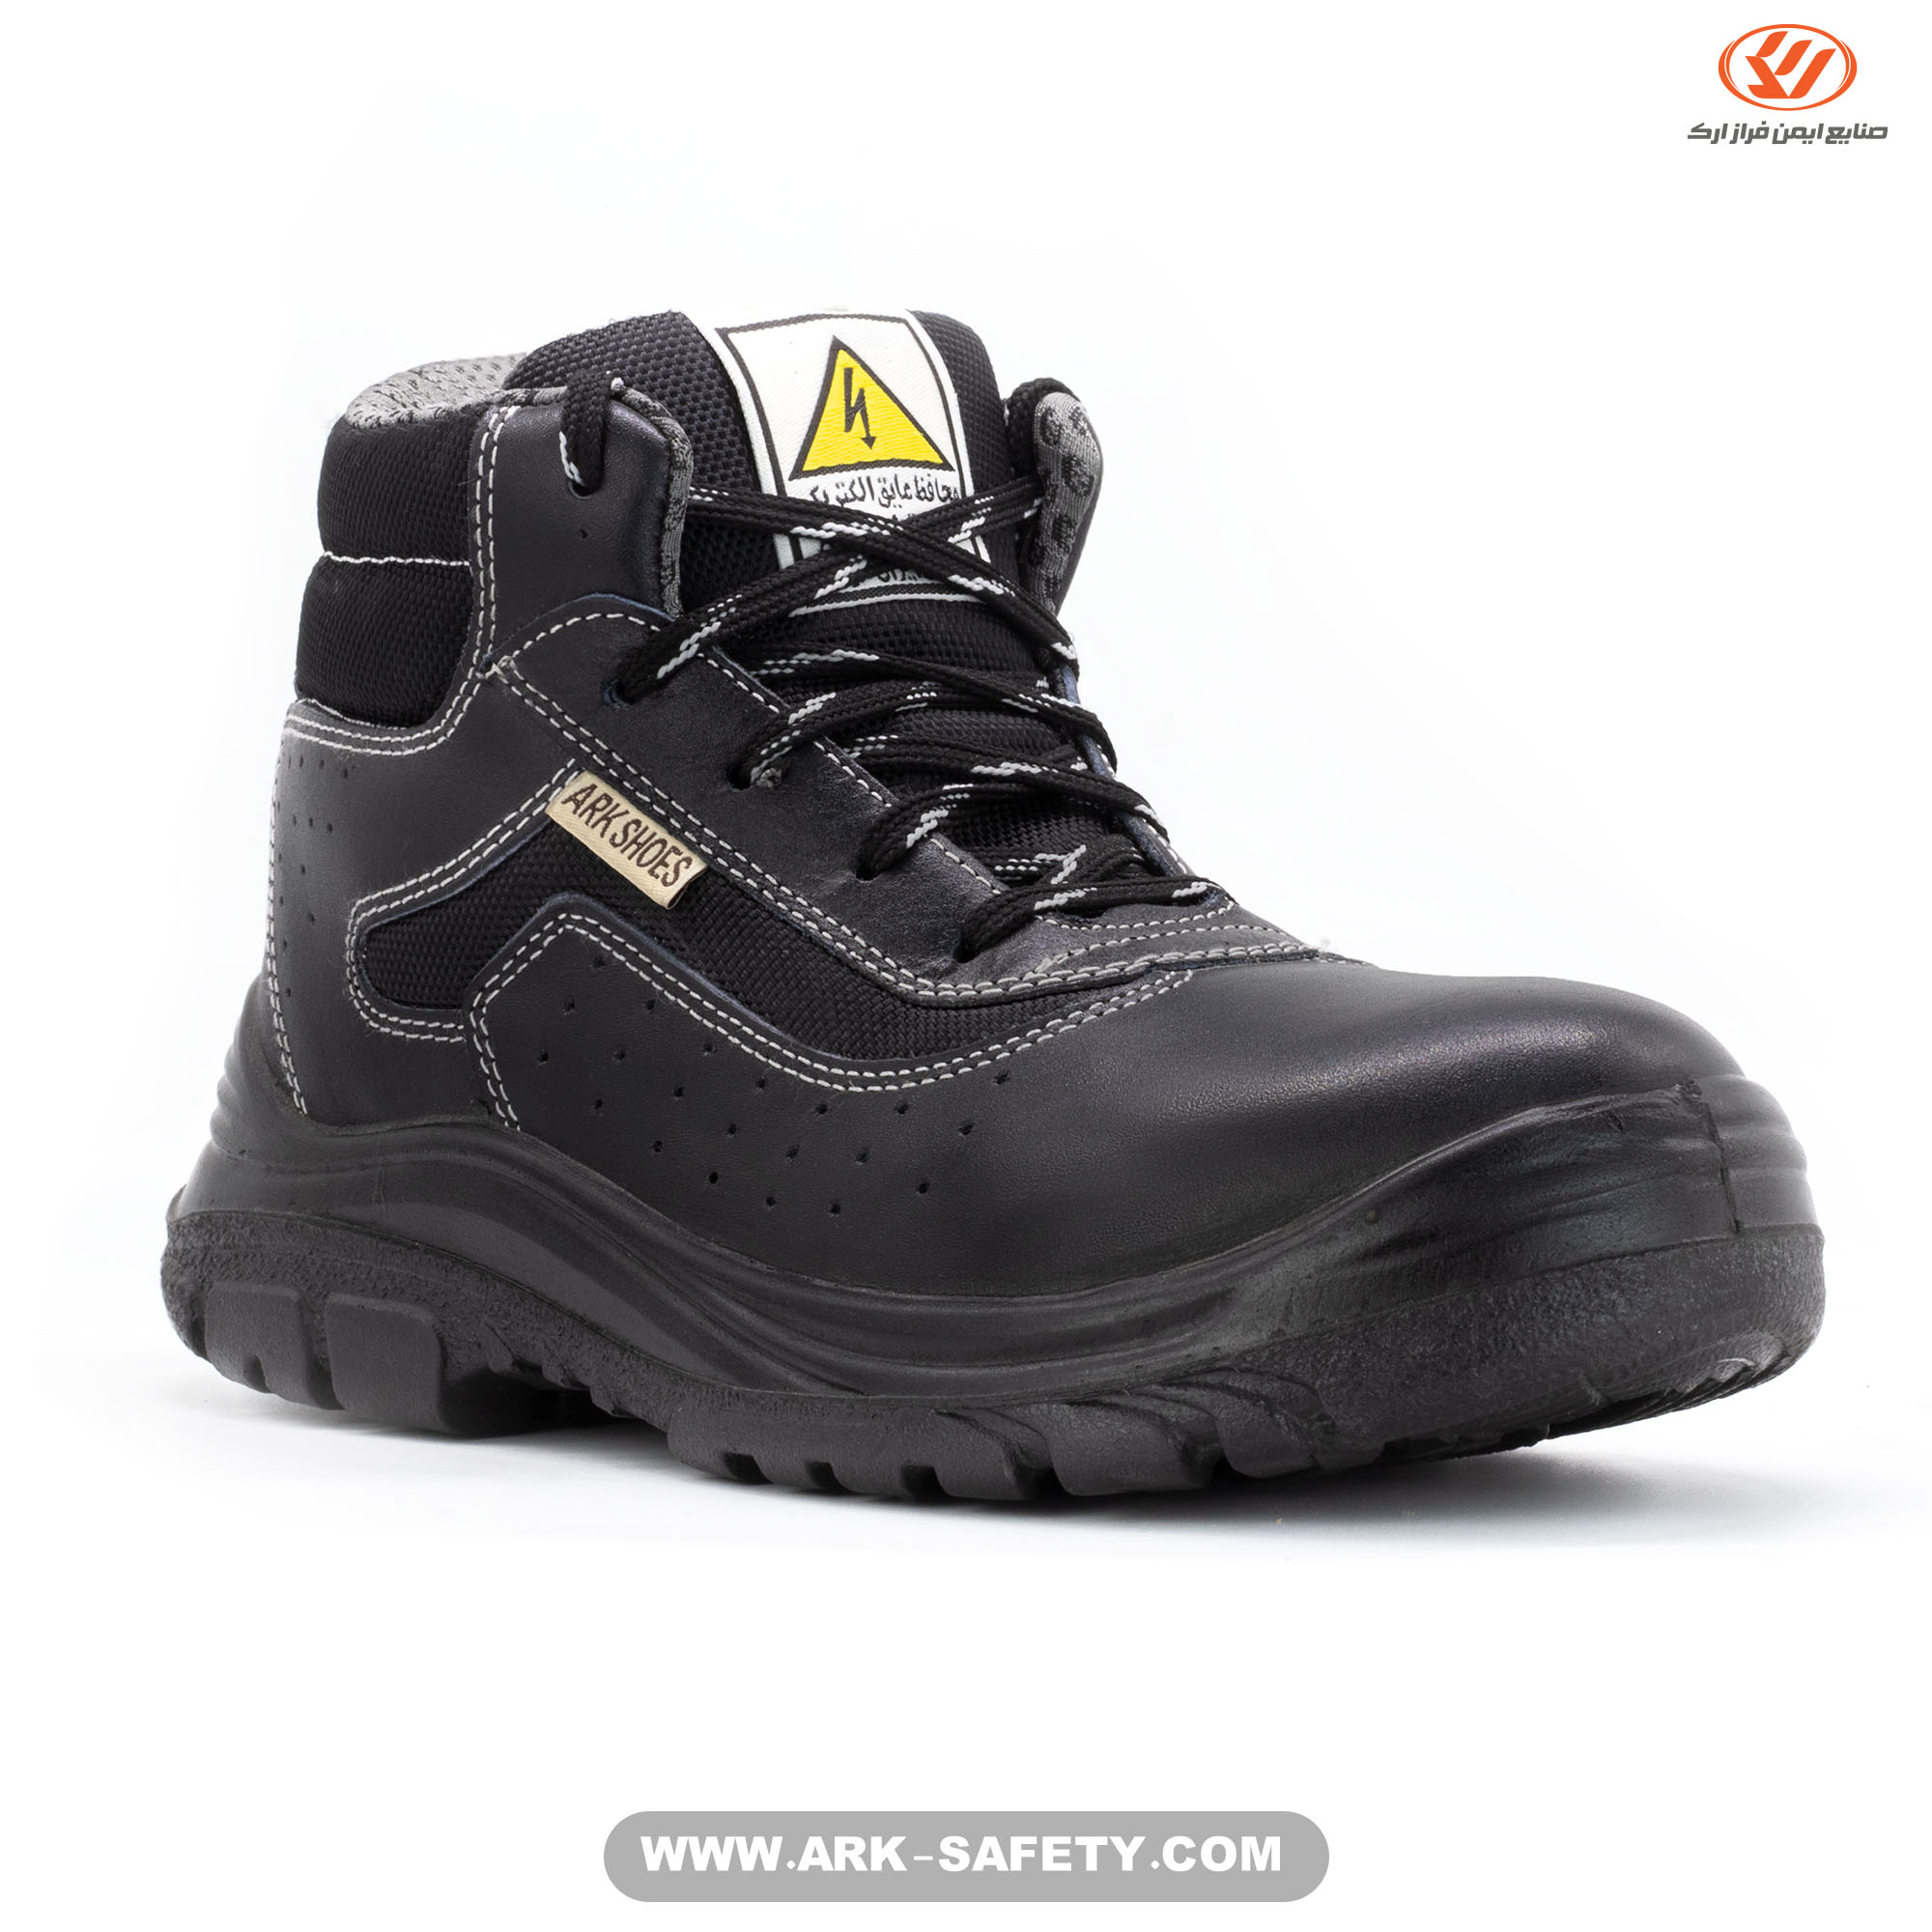 Pro Safety Boots